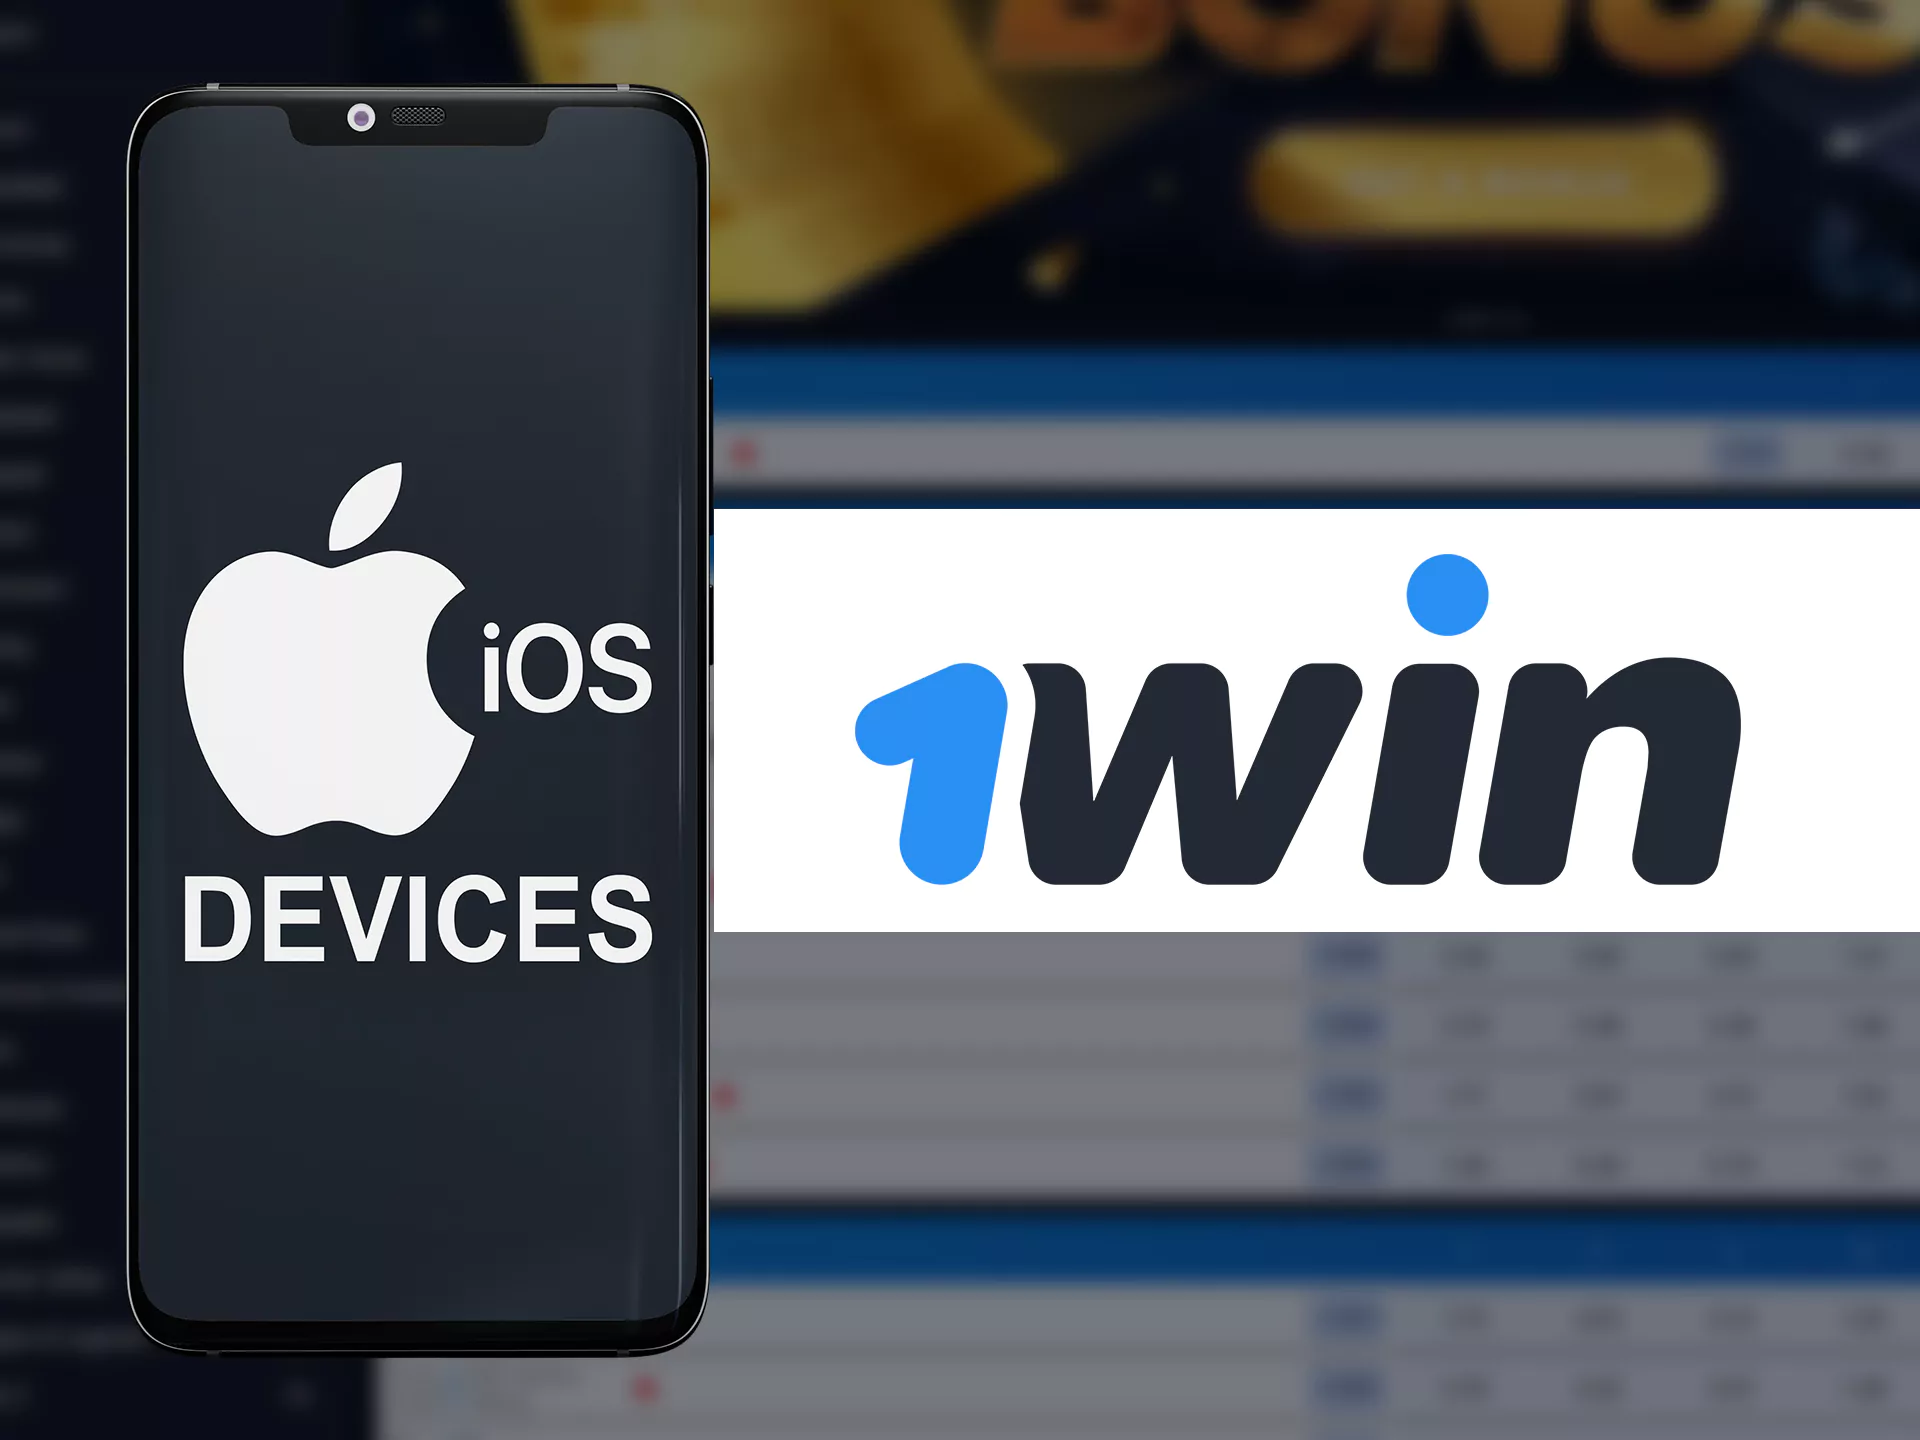 1win app can be installed on various ios devices.